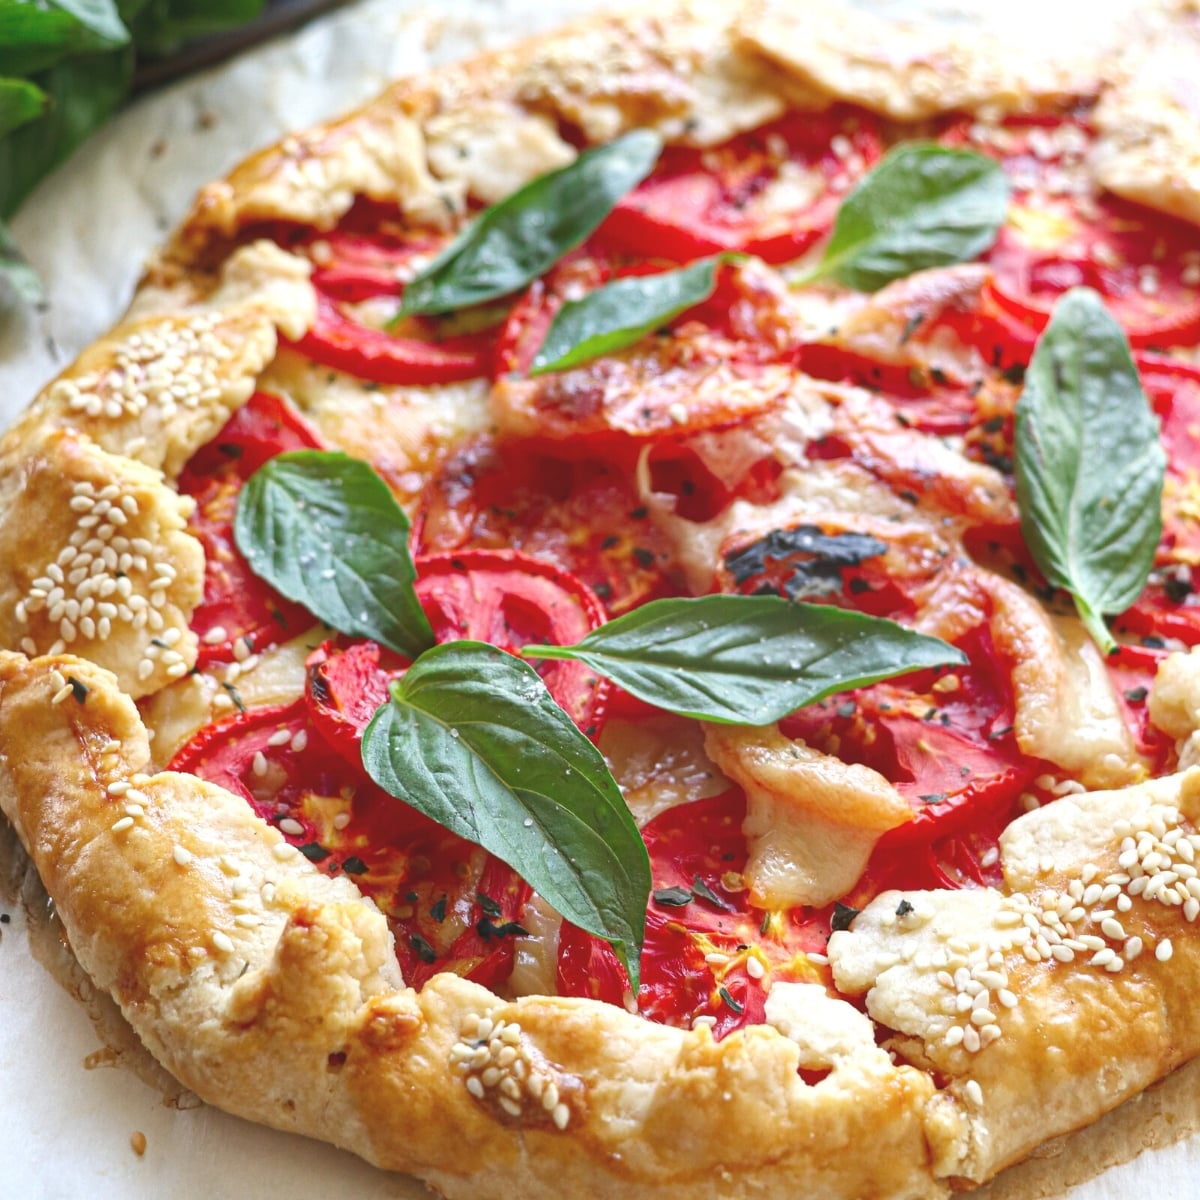 tomato galette with fresh basil and melted mozzarella